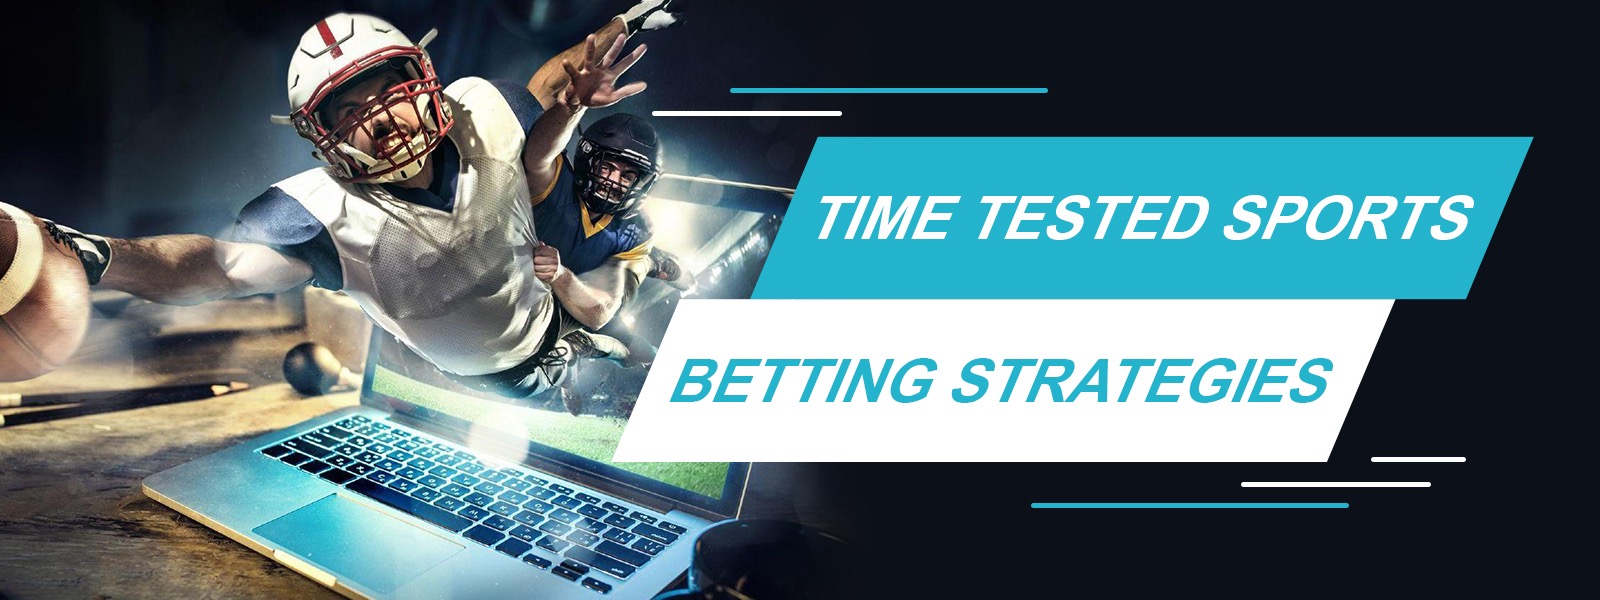 Time-Tested Sports Betting Strategies